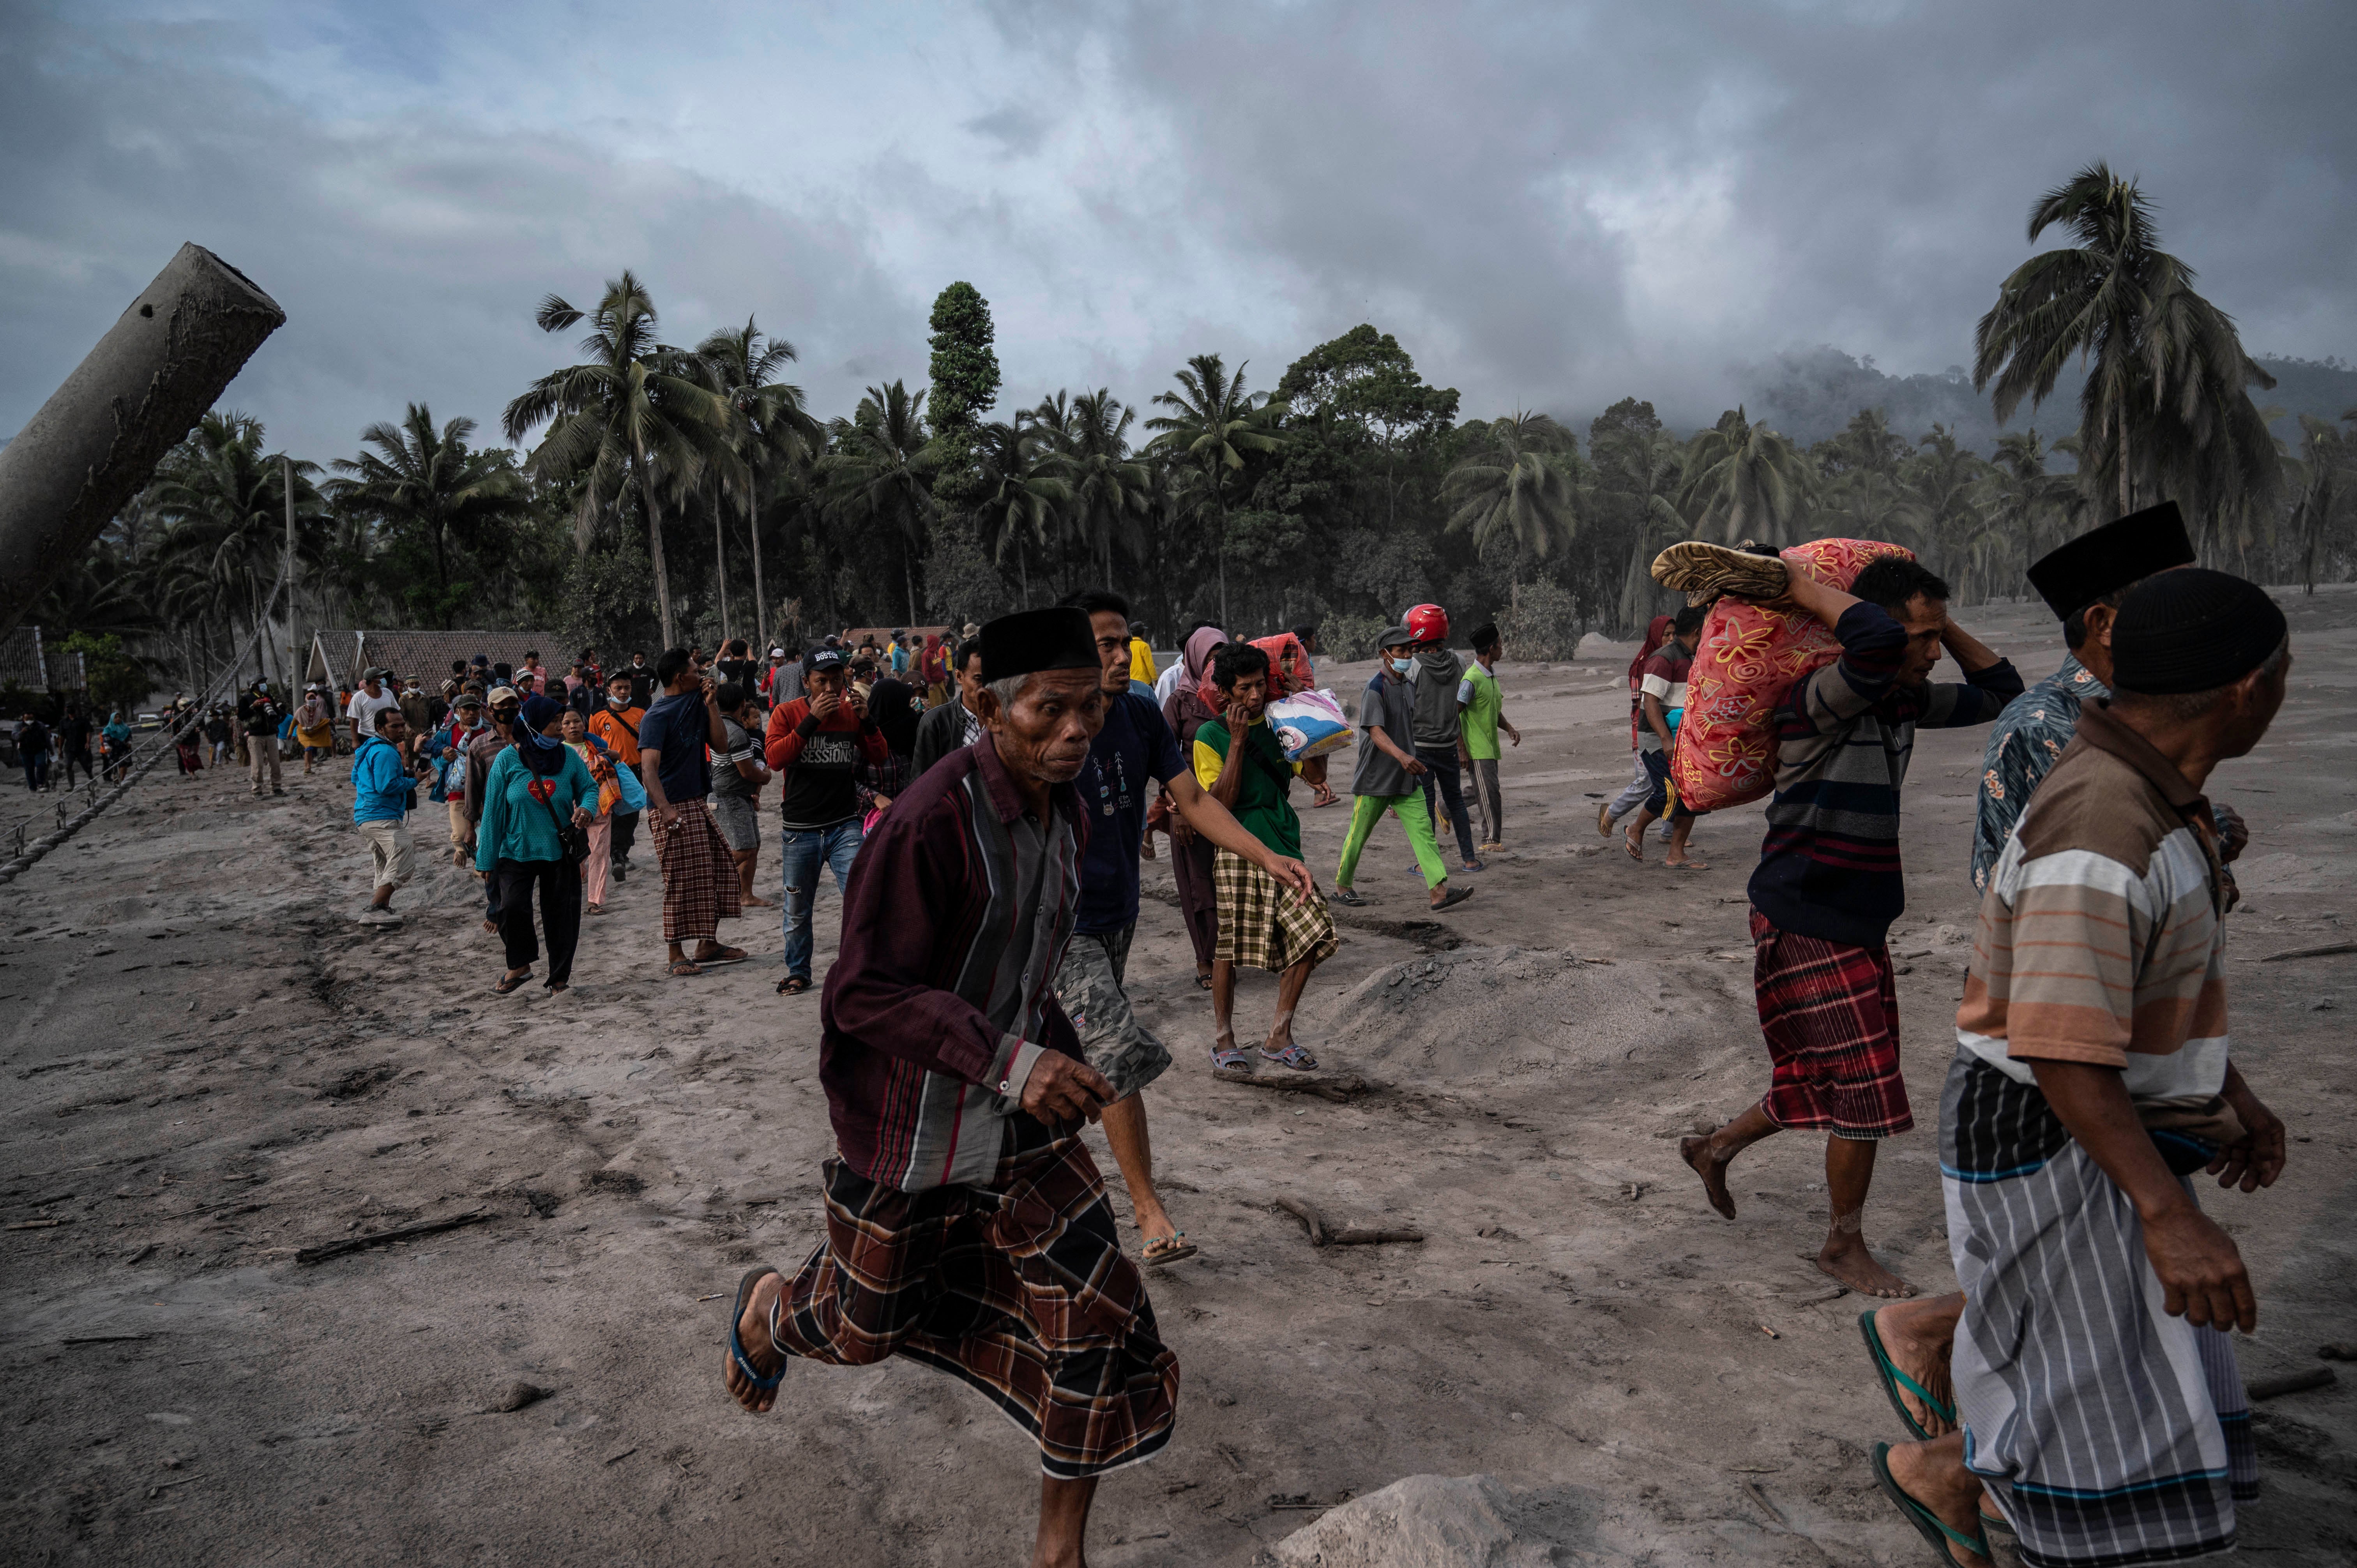 Villagers salvage their belongings in an area covered in volcanic ash at Sumber Wuluh village in Lumajang